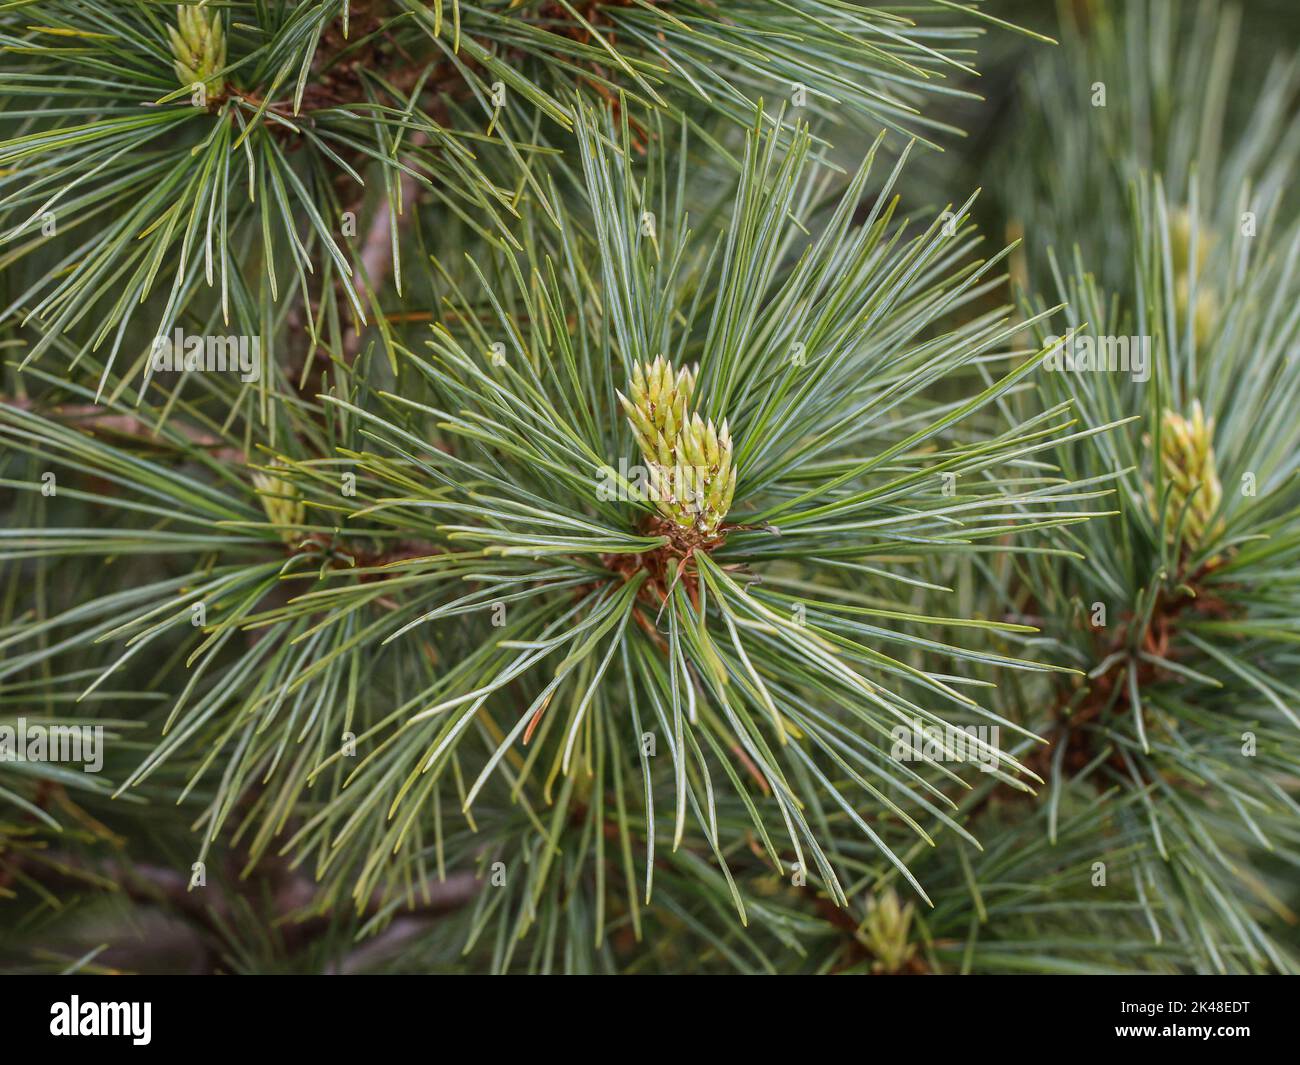 Young shoot on the branch of Macedonian pine (latin name: Pinus peuce) in southwestern Serbia Stock Photo